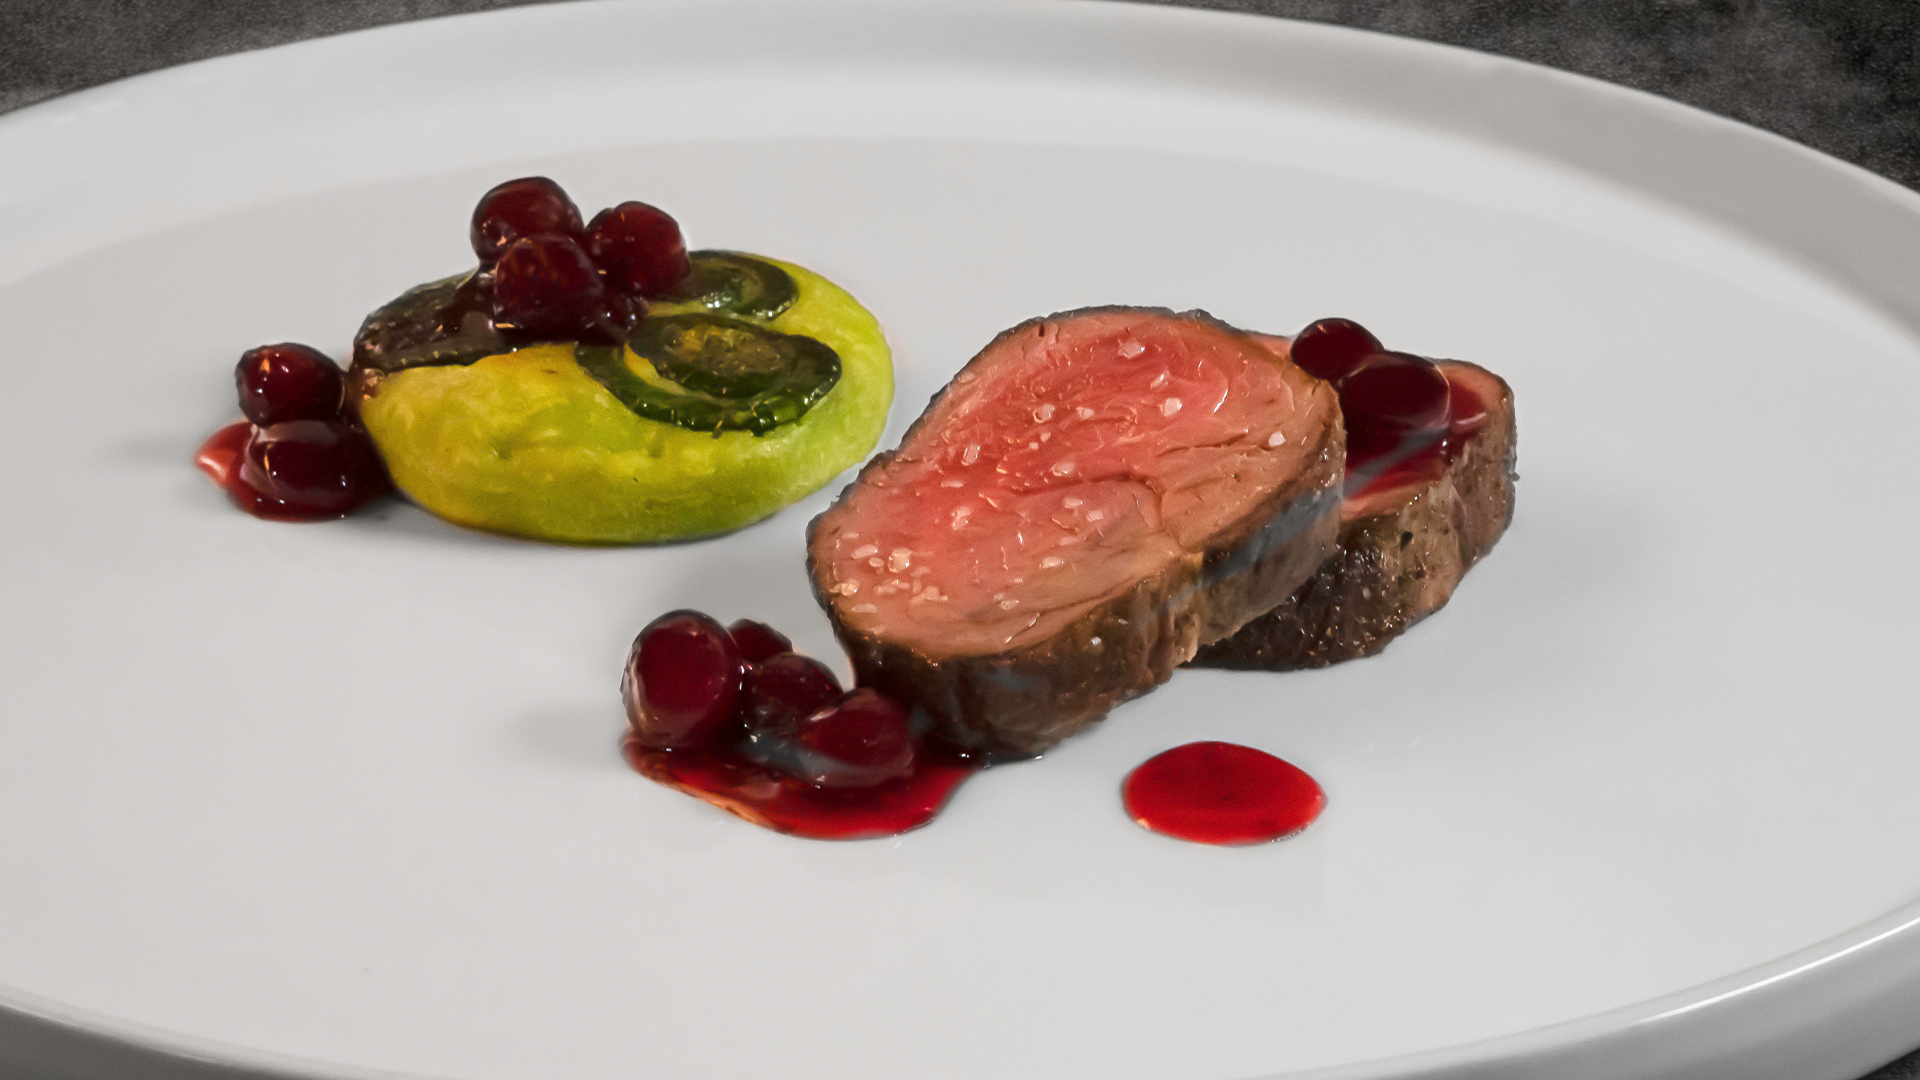 Venison loin with cranberry and fiddlehead